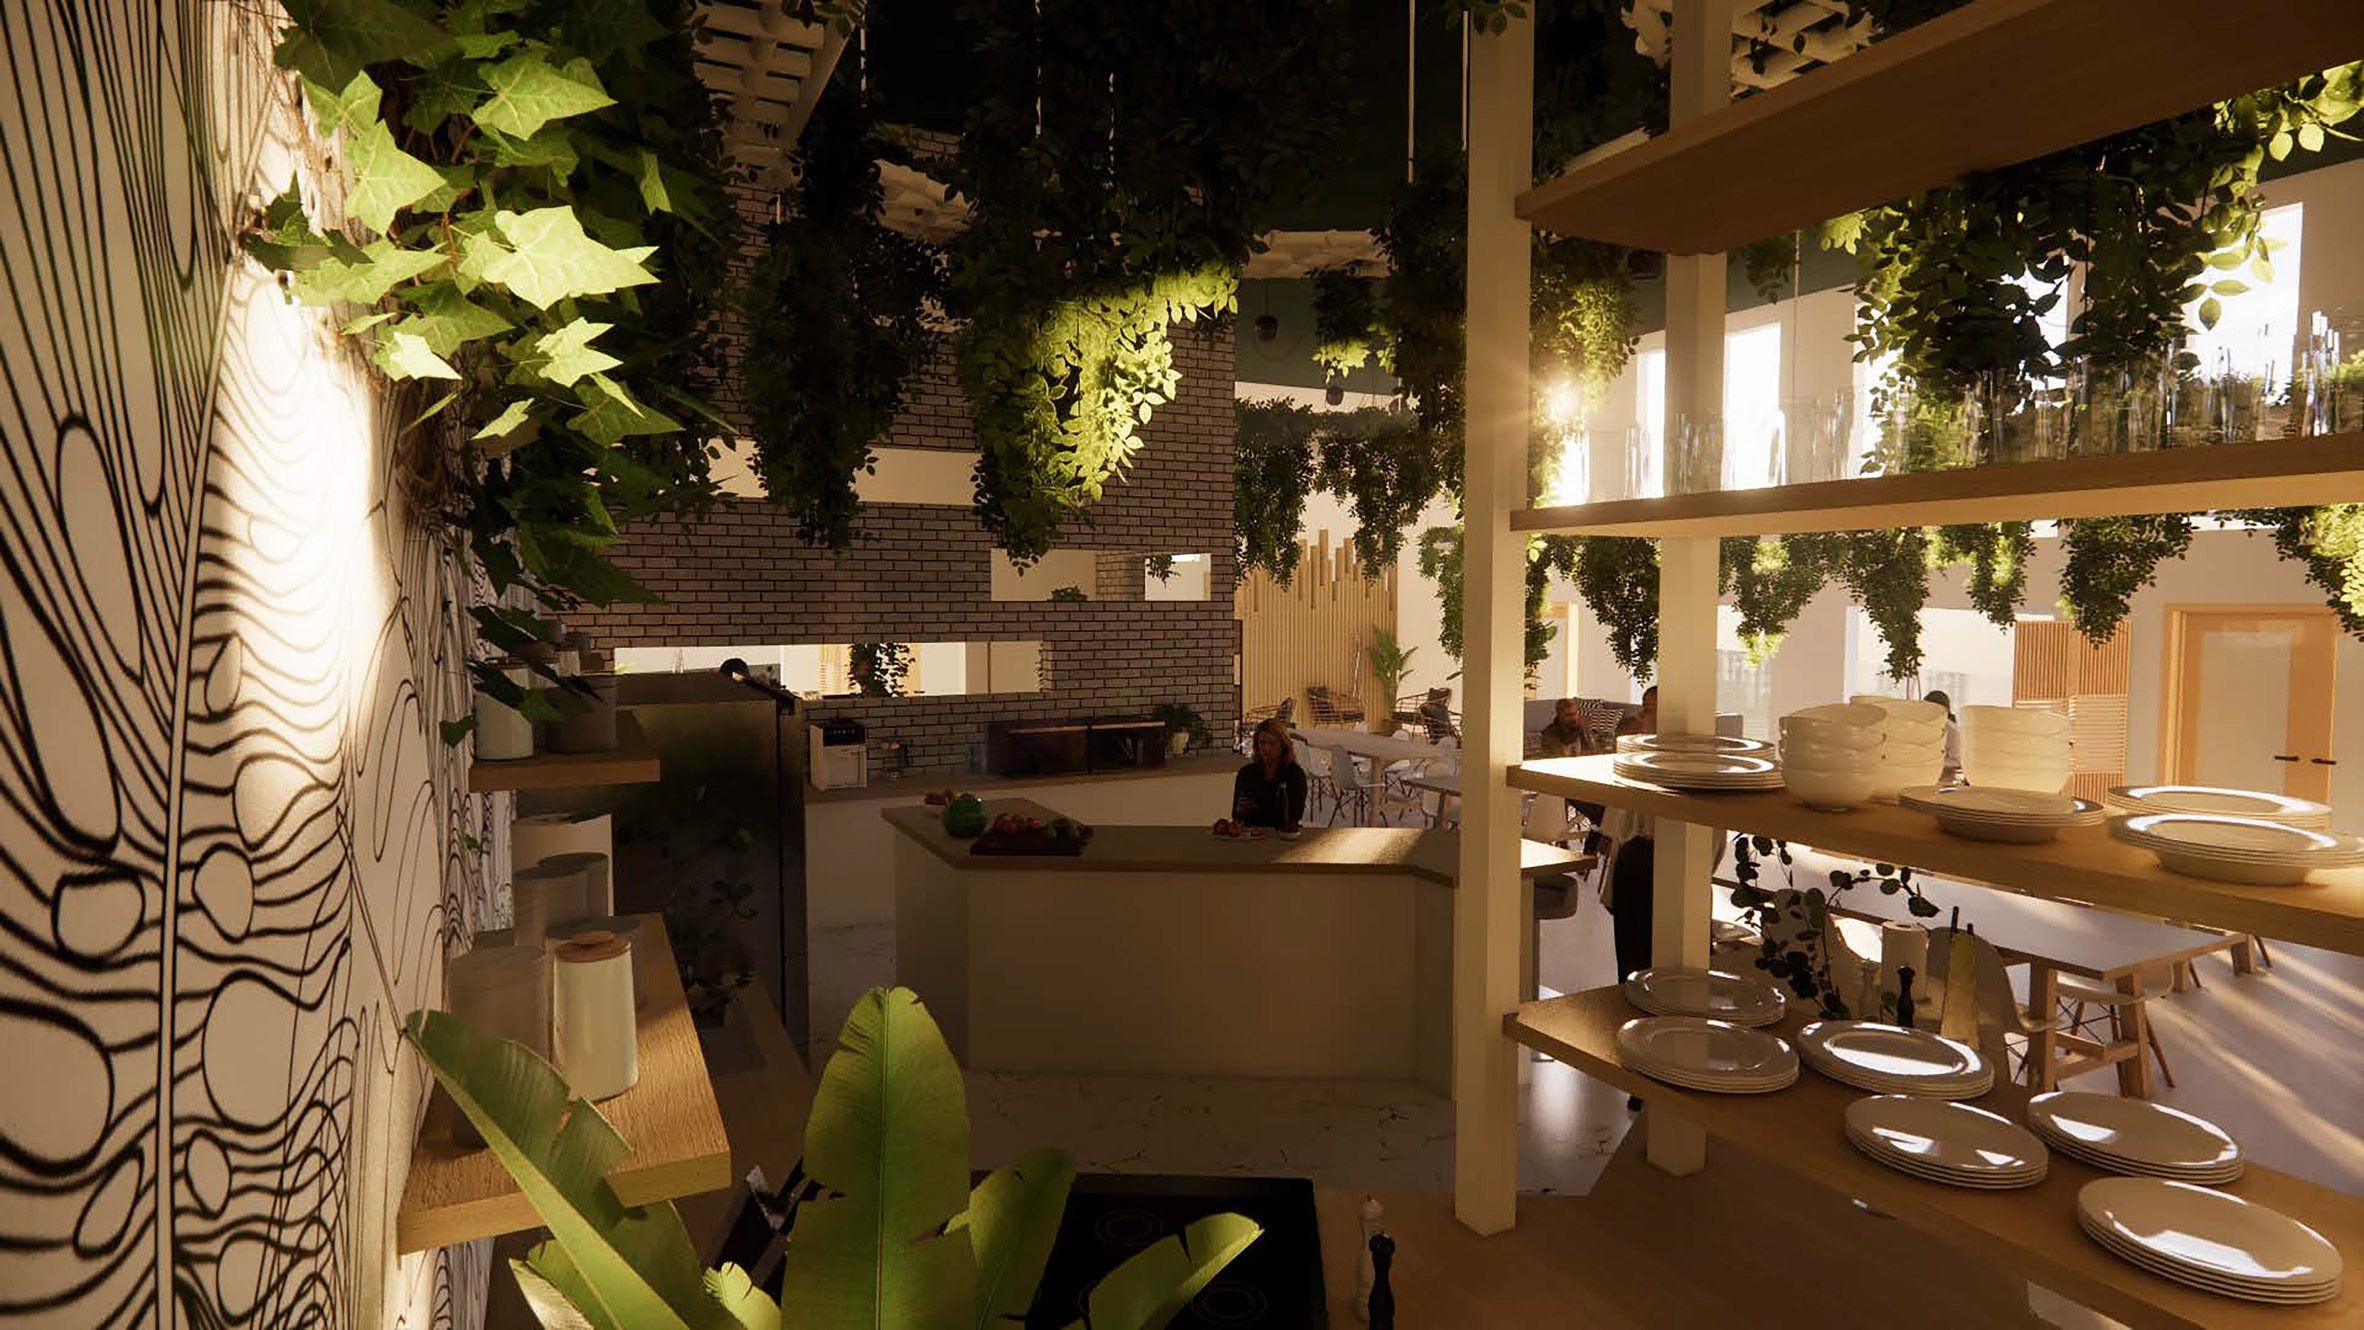 A render of a co-working space with plants and wooden interiors